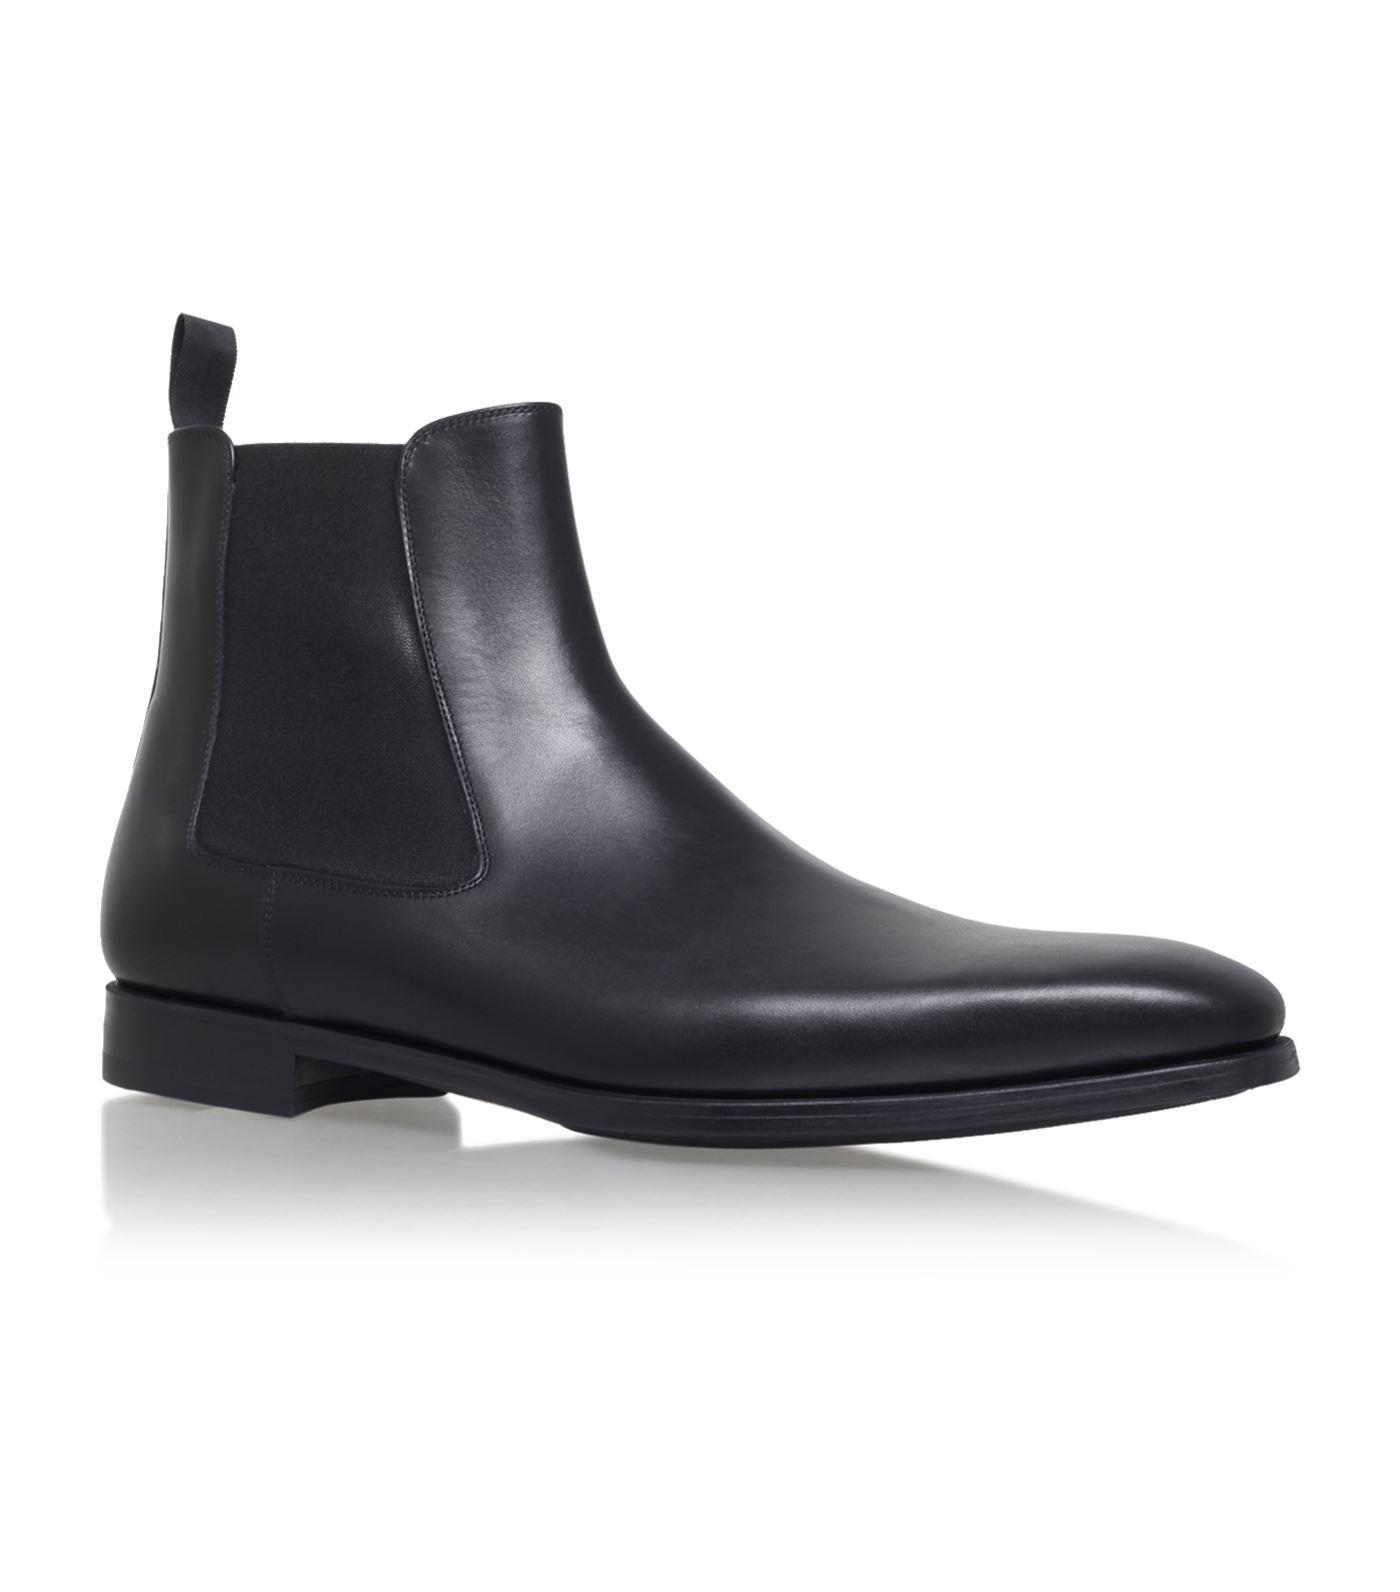 Lyst - Magnanni Shoes Leather Chelsea Boot in Black for Men